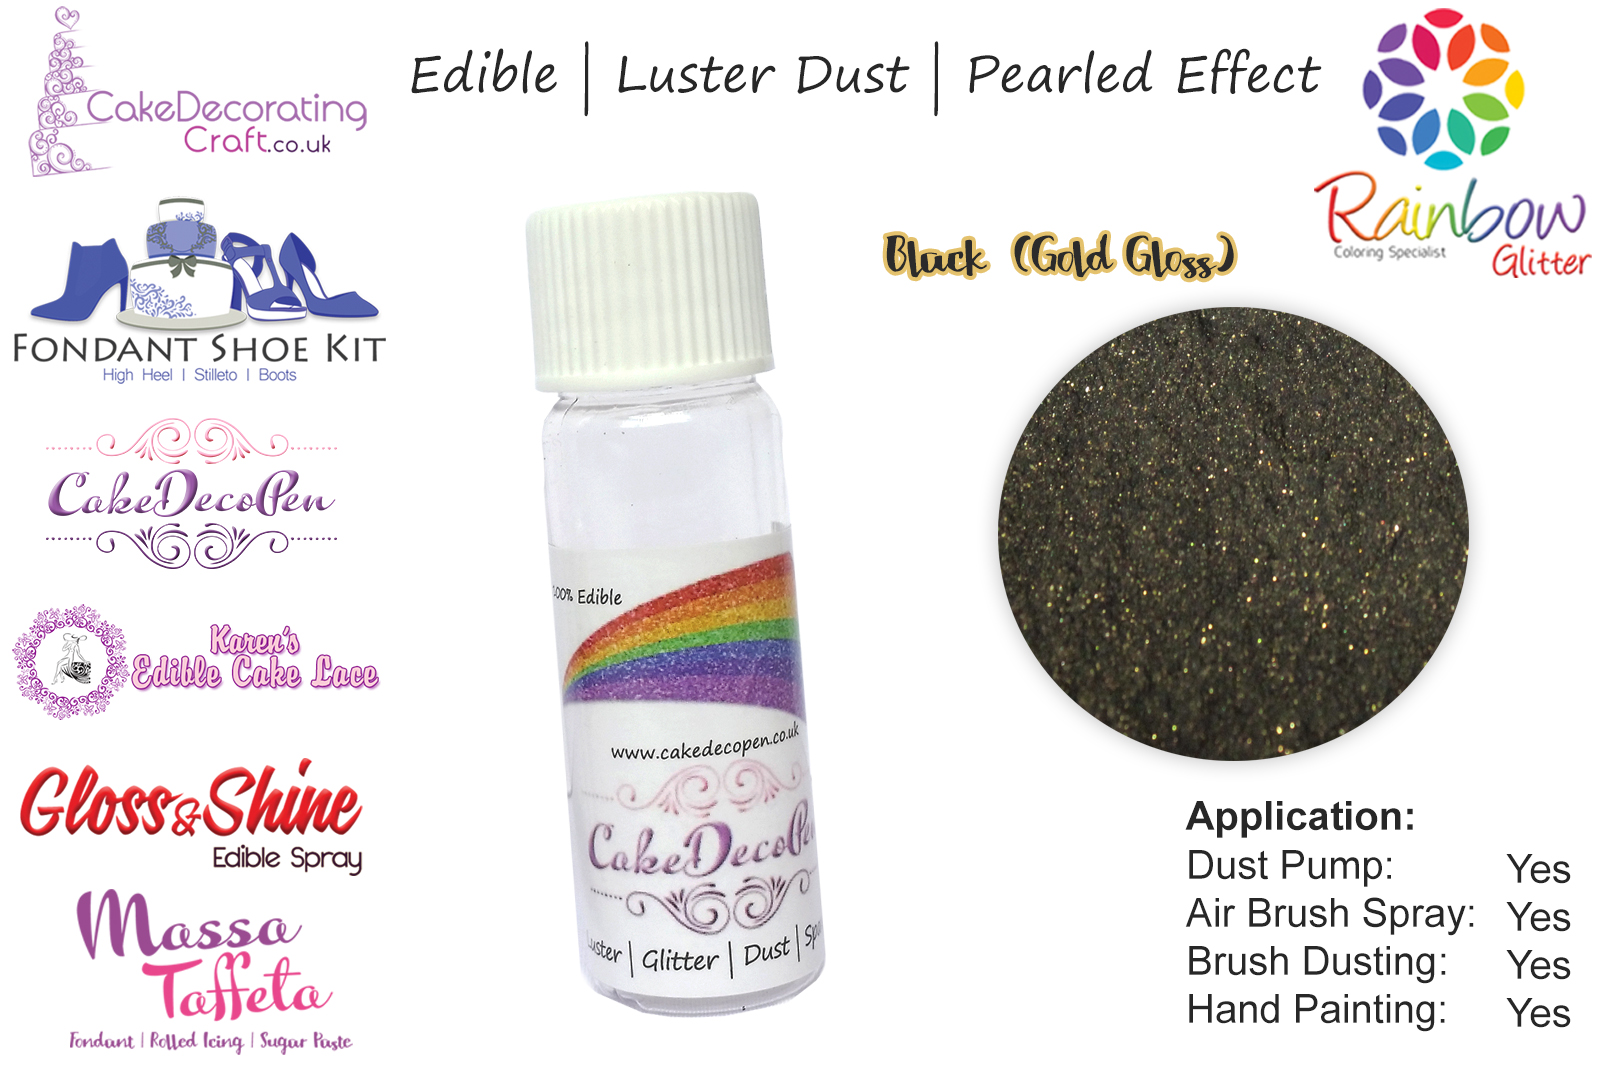 Black (Gold Gloss)  | 4 Gram Tube | Luster Dust | Pearled Effect | For Cake Decorating | Christmas Edible Decorating Essential